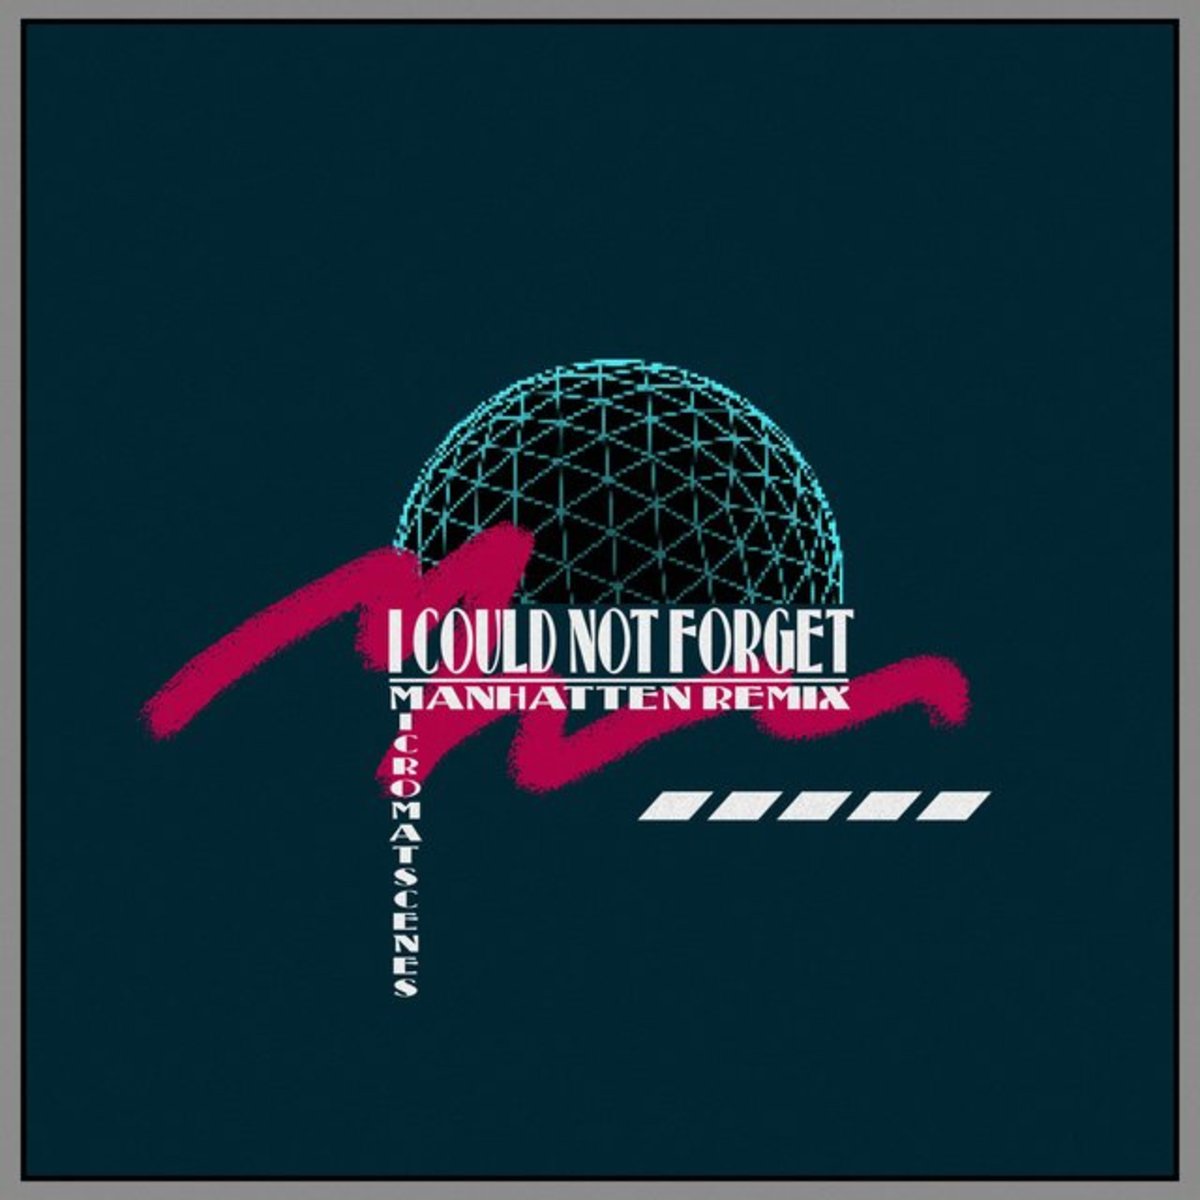 synth-single-review-i-could-not-forget-manhatten-vaporwave-remix-by-manhatten-micromatscenes